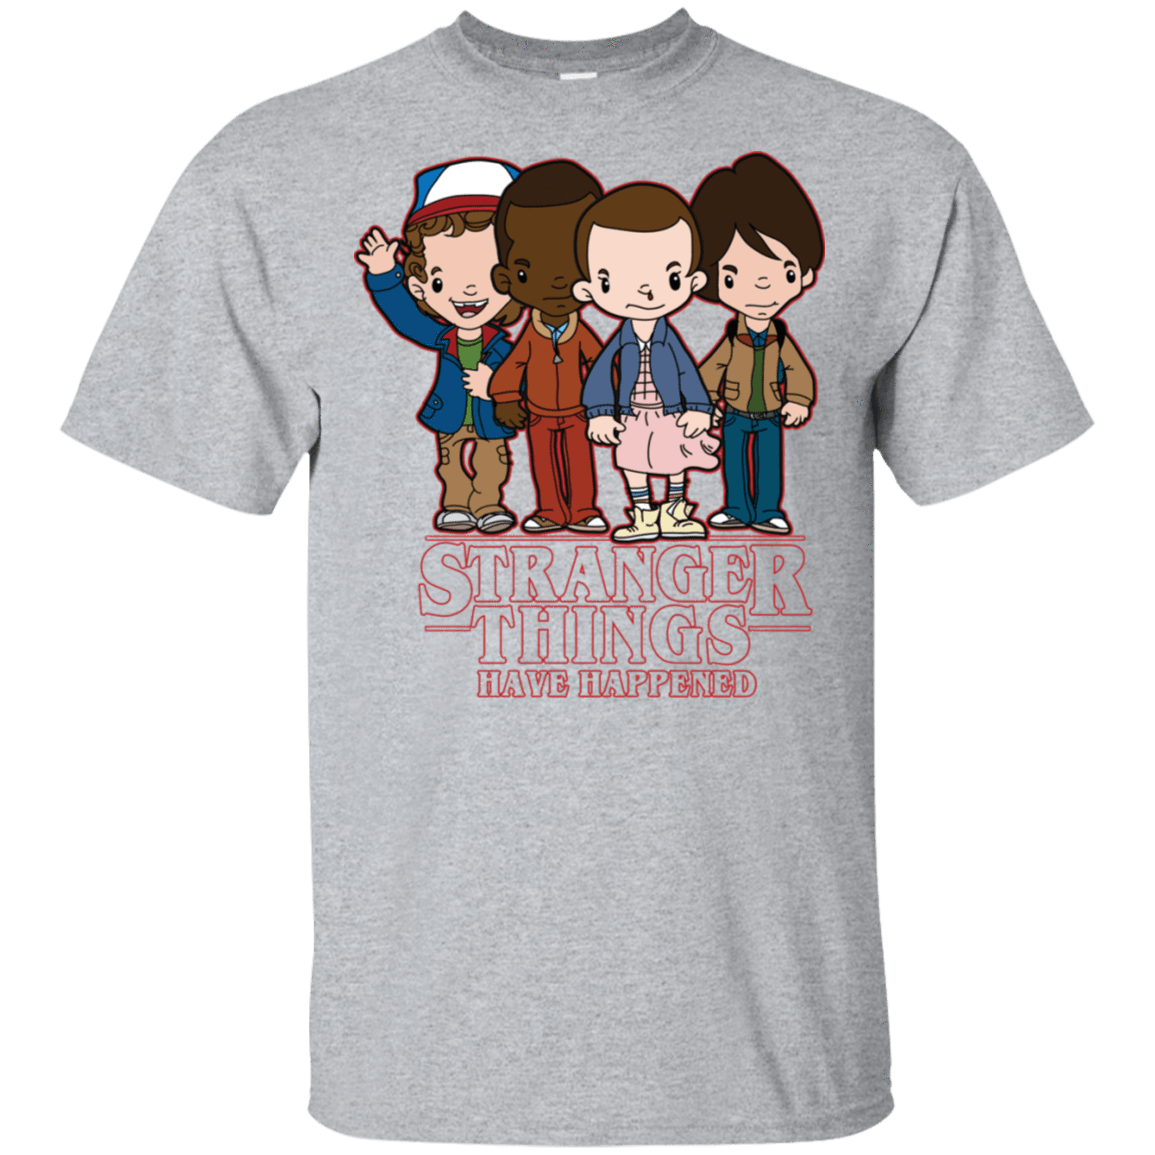 T-Shirts Sport Grey / S Stranger Things Have Happened T-Shirt